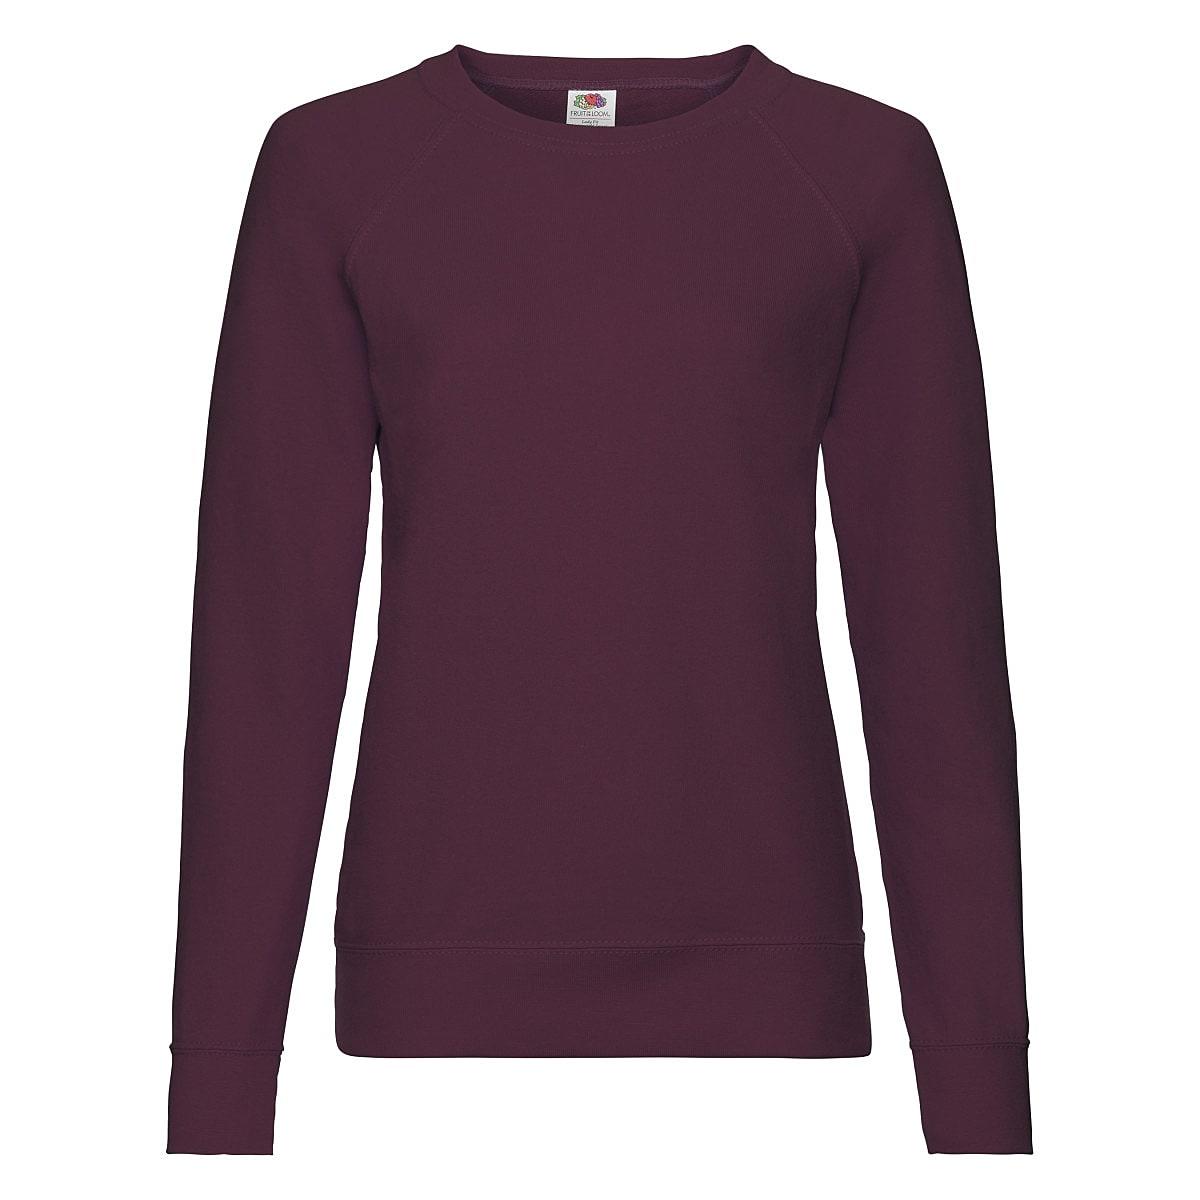 Fruit Of The Loom Lady-Fit Lightweight Raglan Sweater in Burgundy (Product Code: 62146)